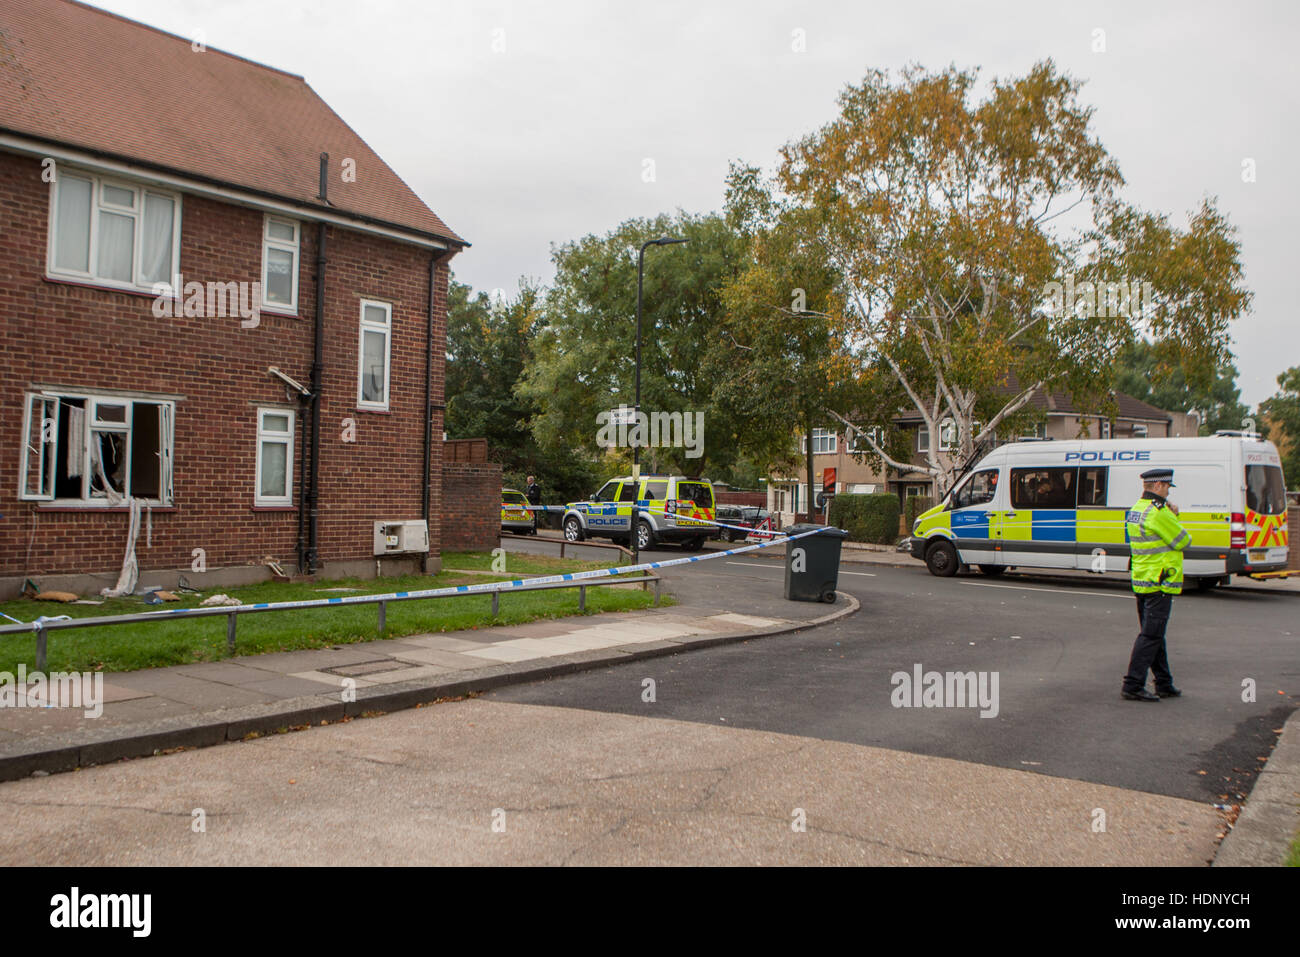 A three-day stand-off between armed police and a man feared to have petrol at his home has ended. Officers forced entry to the house in Wood End Lane, Northolt, west London, last night (23Oct16). A man in his 40s has been arrested on suspicion of offences Stock Photo